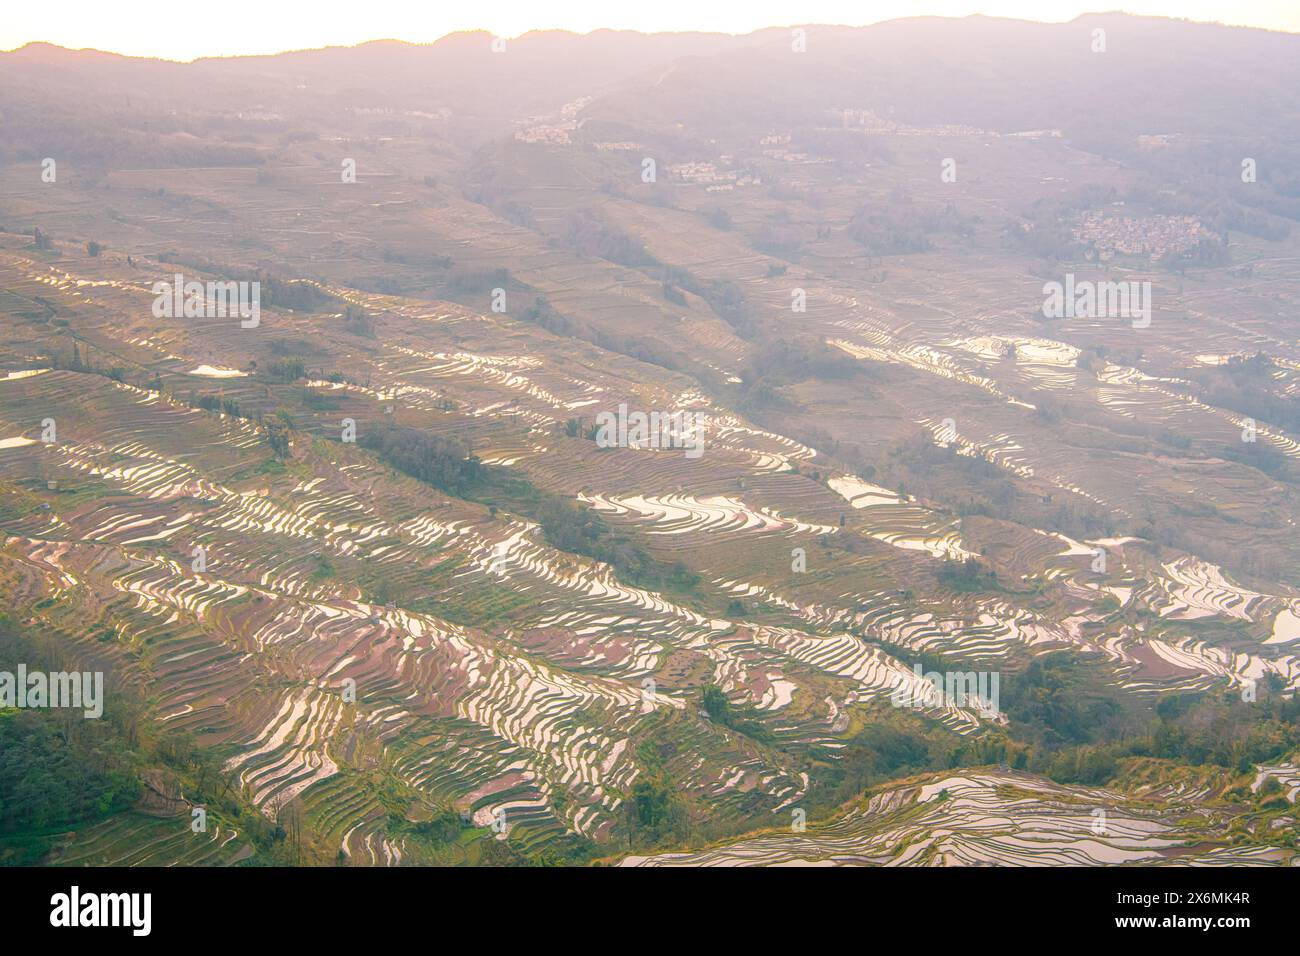 Yuan Yang Rice Terraces - Bada under the sunset in Yunnan province of China. Close up image with copy space Stock Photo